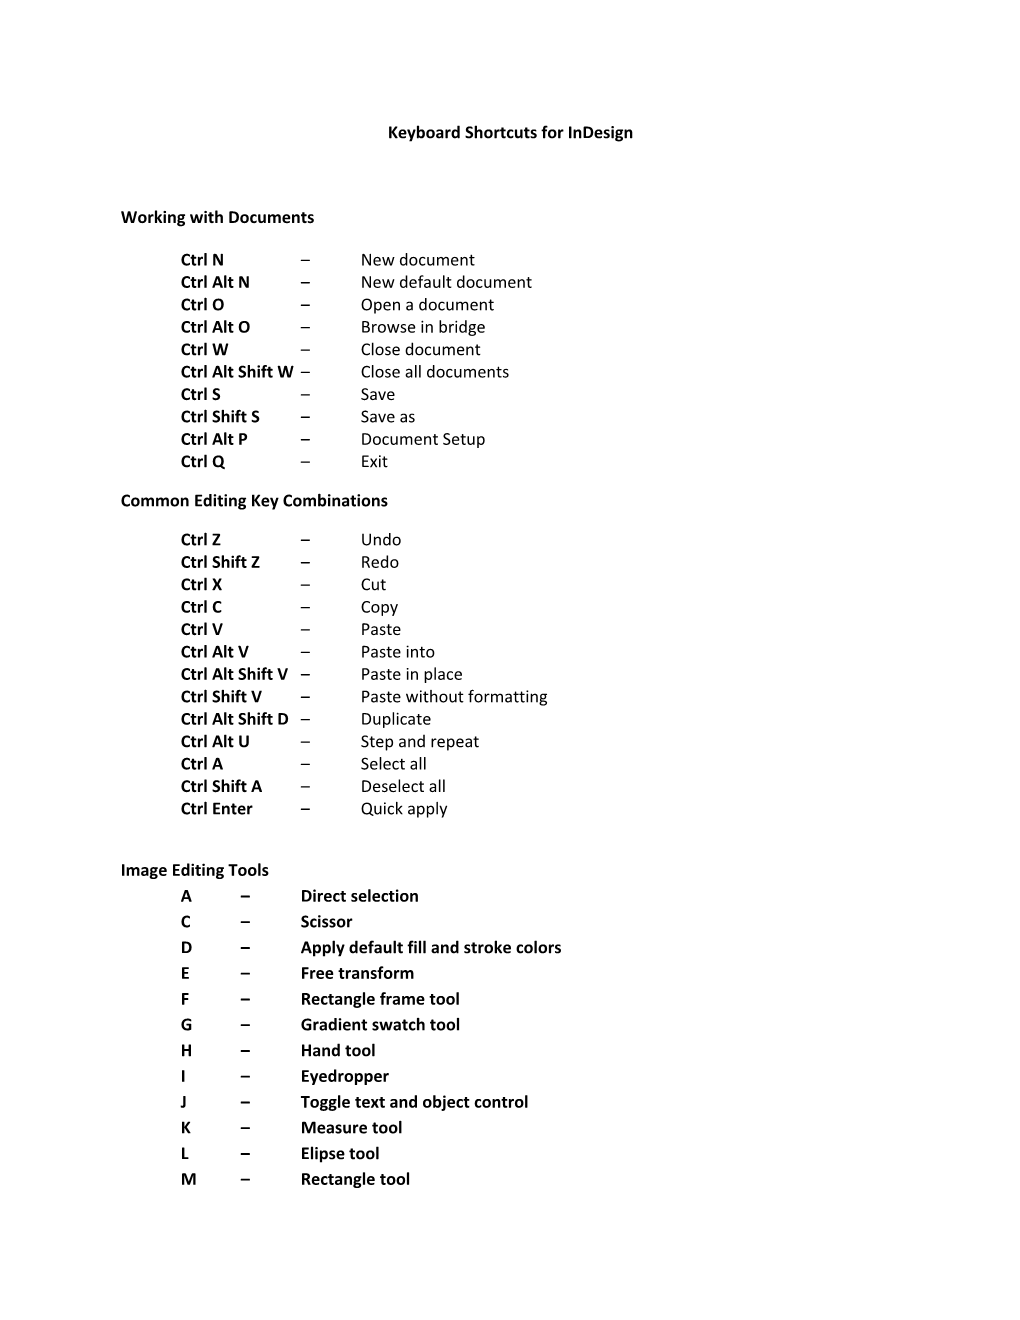 Keyboard Shortcuts for Indesign